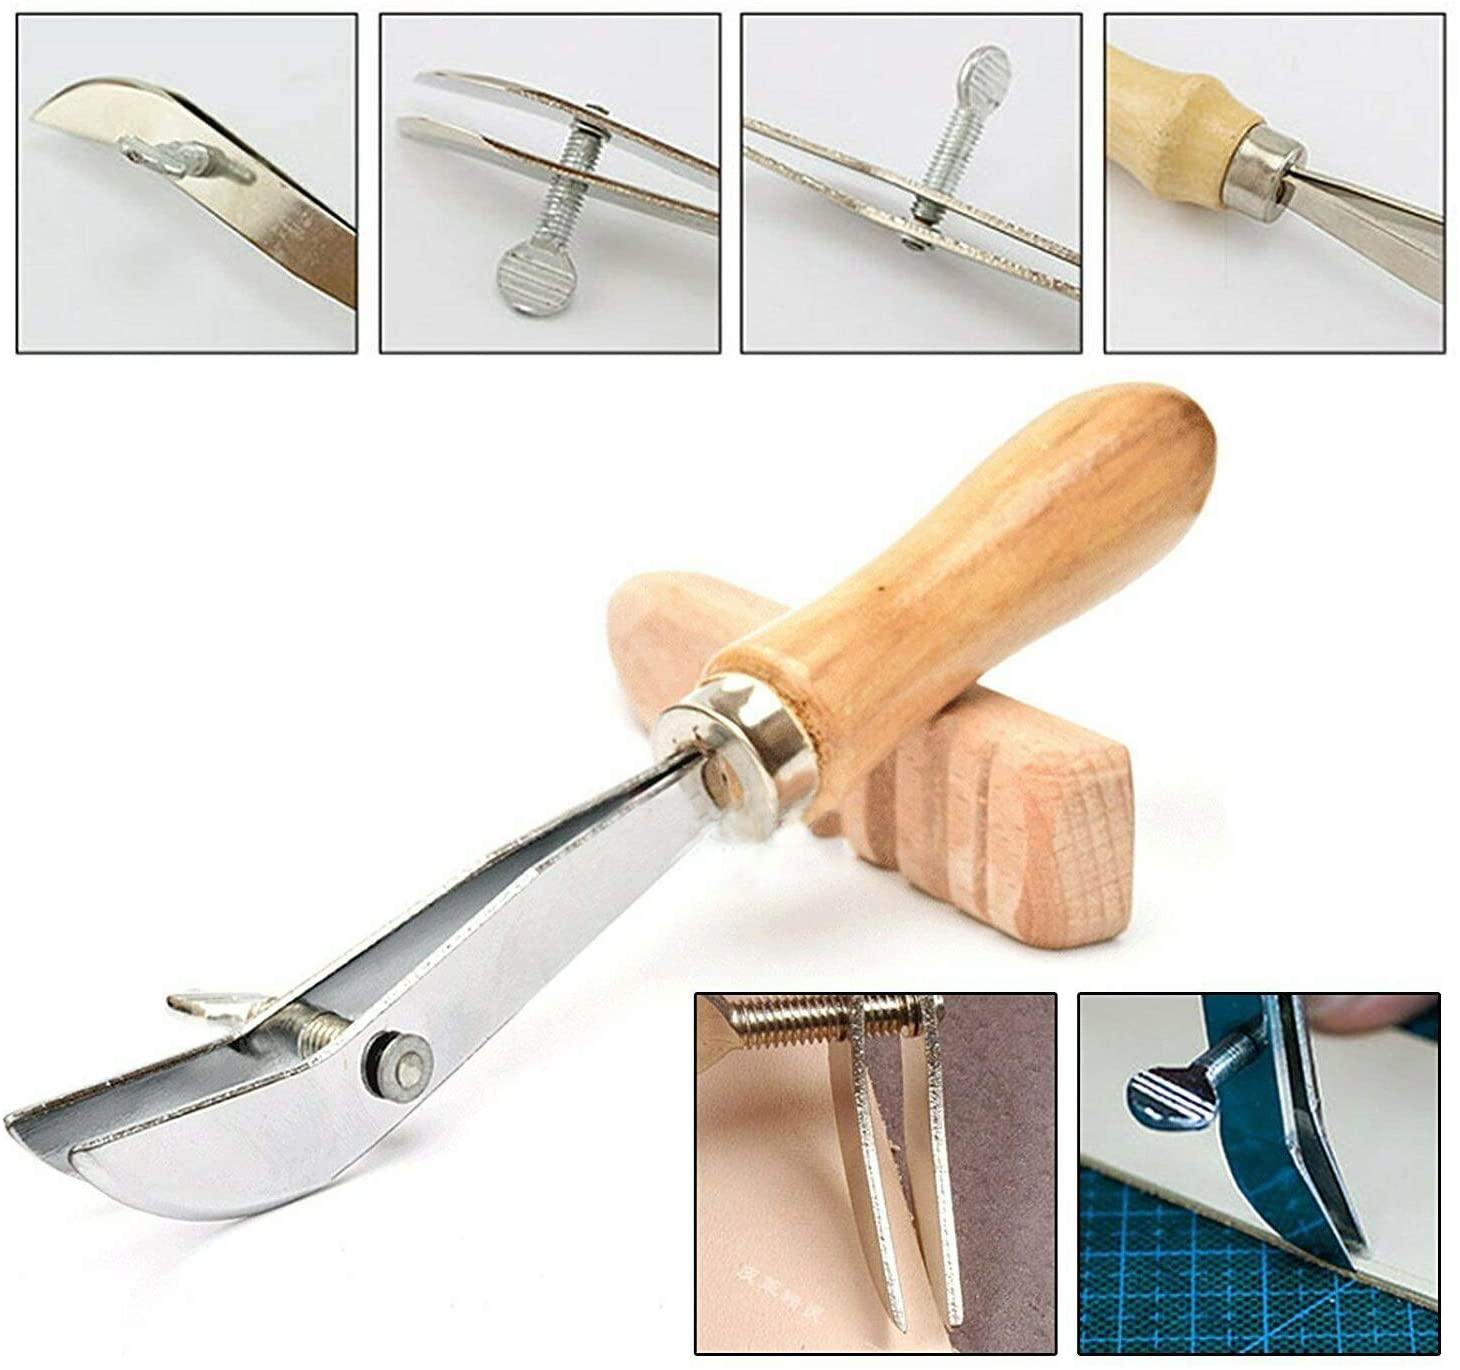 Swivel Knife,Knoweasy Stainless Steel Leather Cutting Tool with Adjustable  Handy Level 3.15-3.74 for Art Crafts DIY